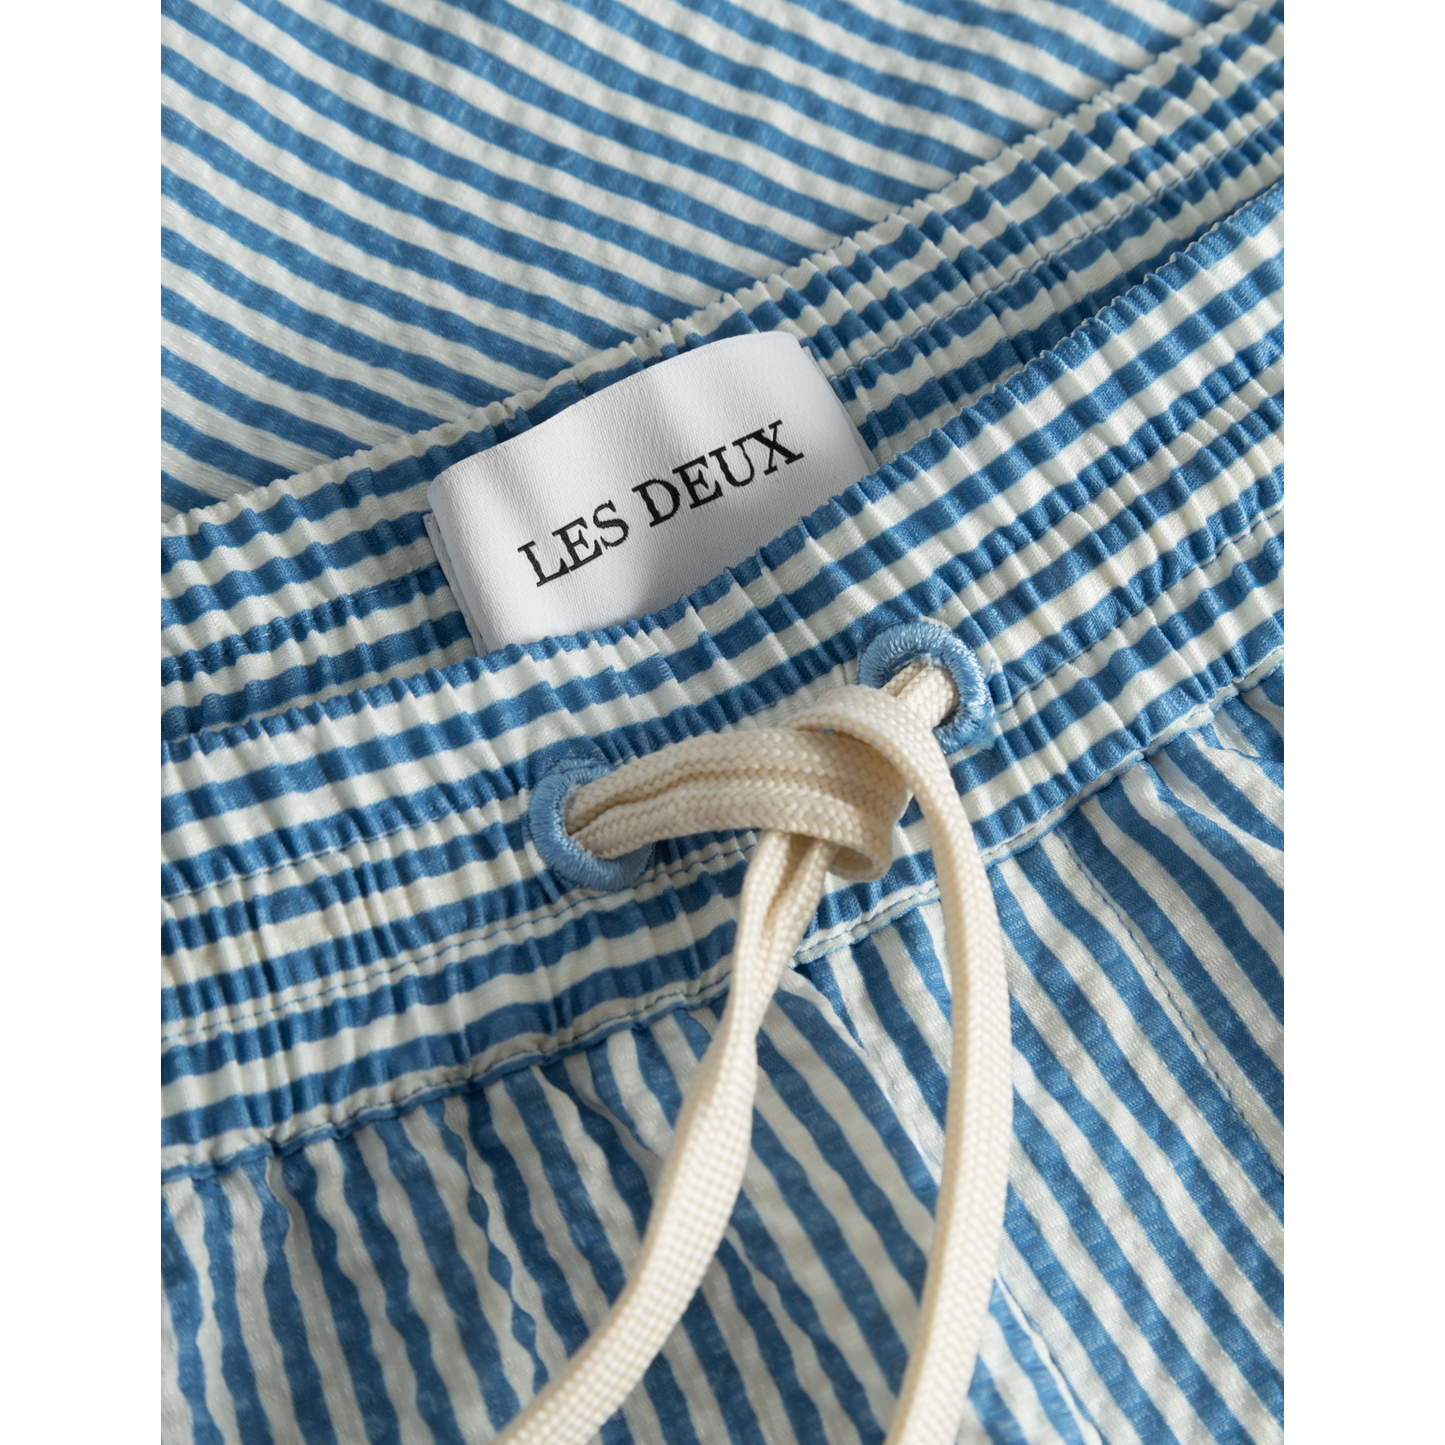 Close-up of a Stan Stripe Seersucker Swim Shorts in Washed Denim Blue/Light Ivory with a "Les Deux" label and a white drawstring.